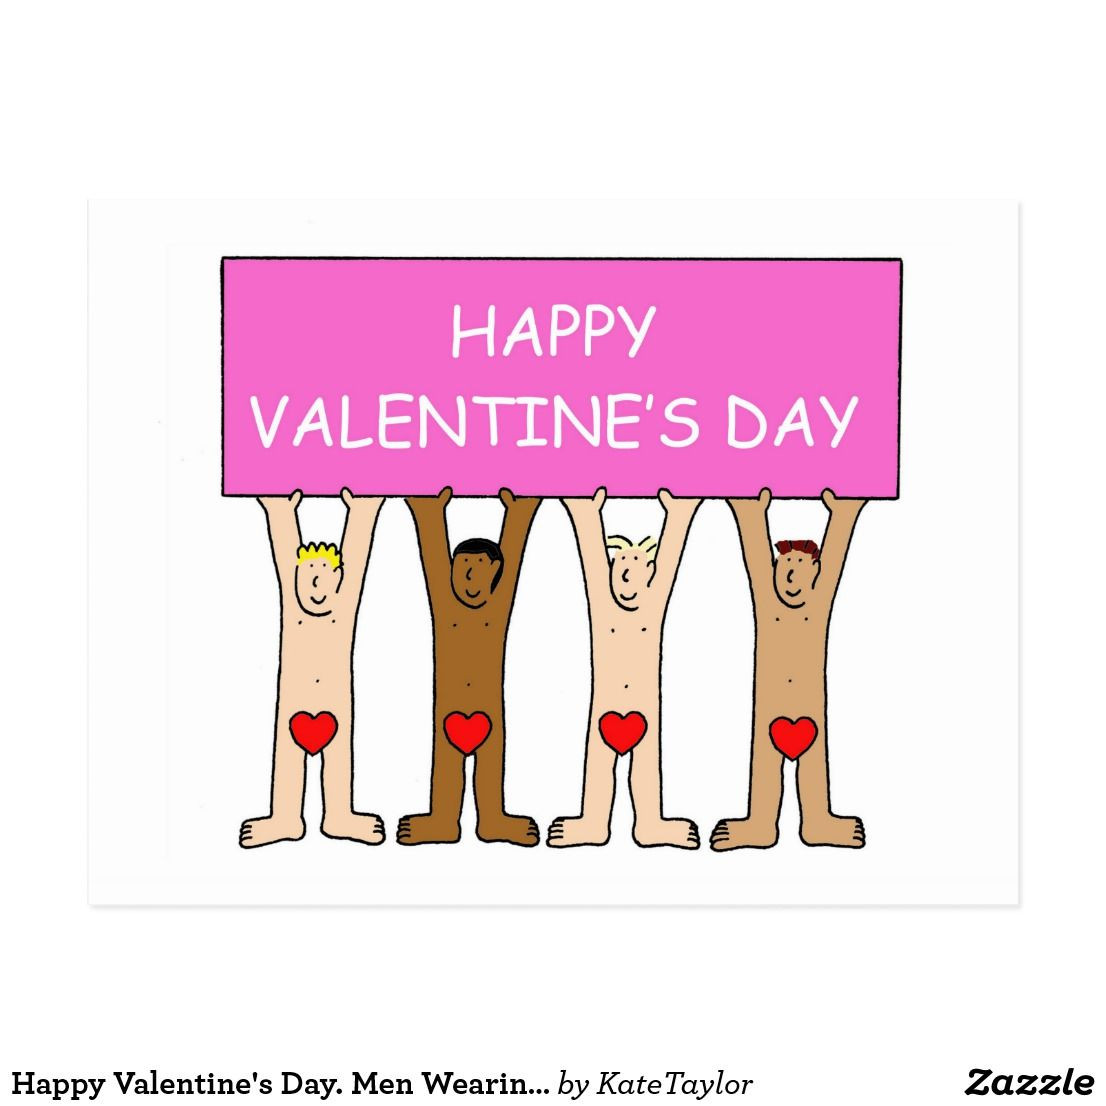 20-best-gay-valentines-day-ideas-best-recipes-ideas-and-collections